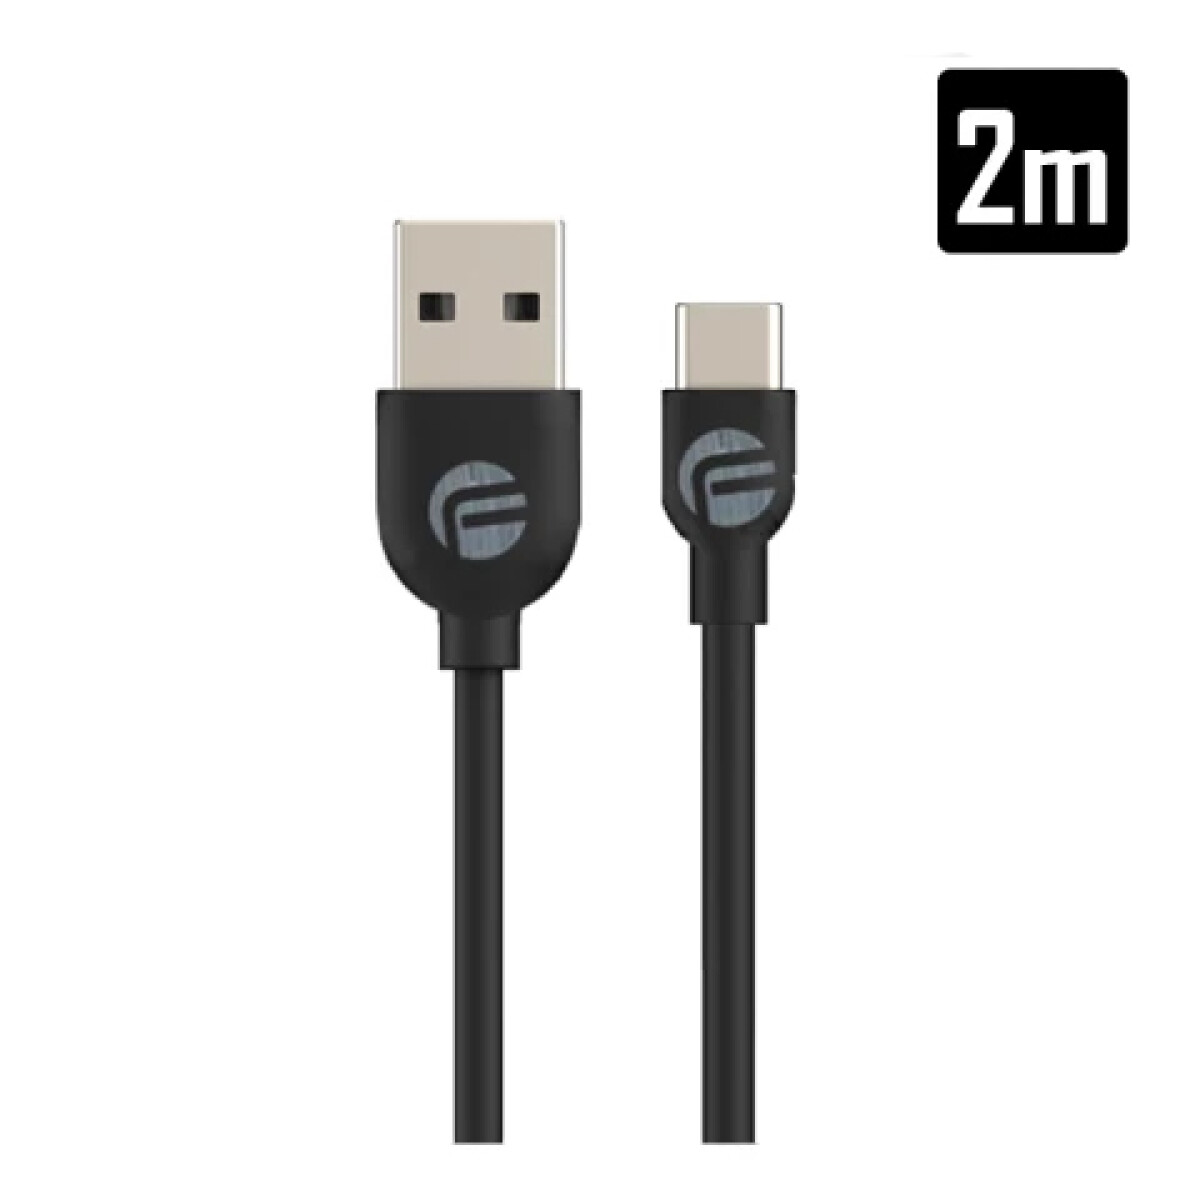 Cable USB Tipo C 7FT FIFO60419 - Unica 